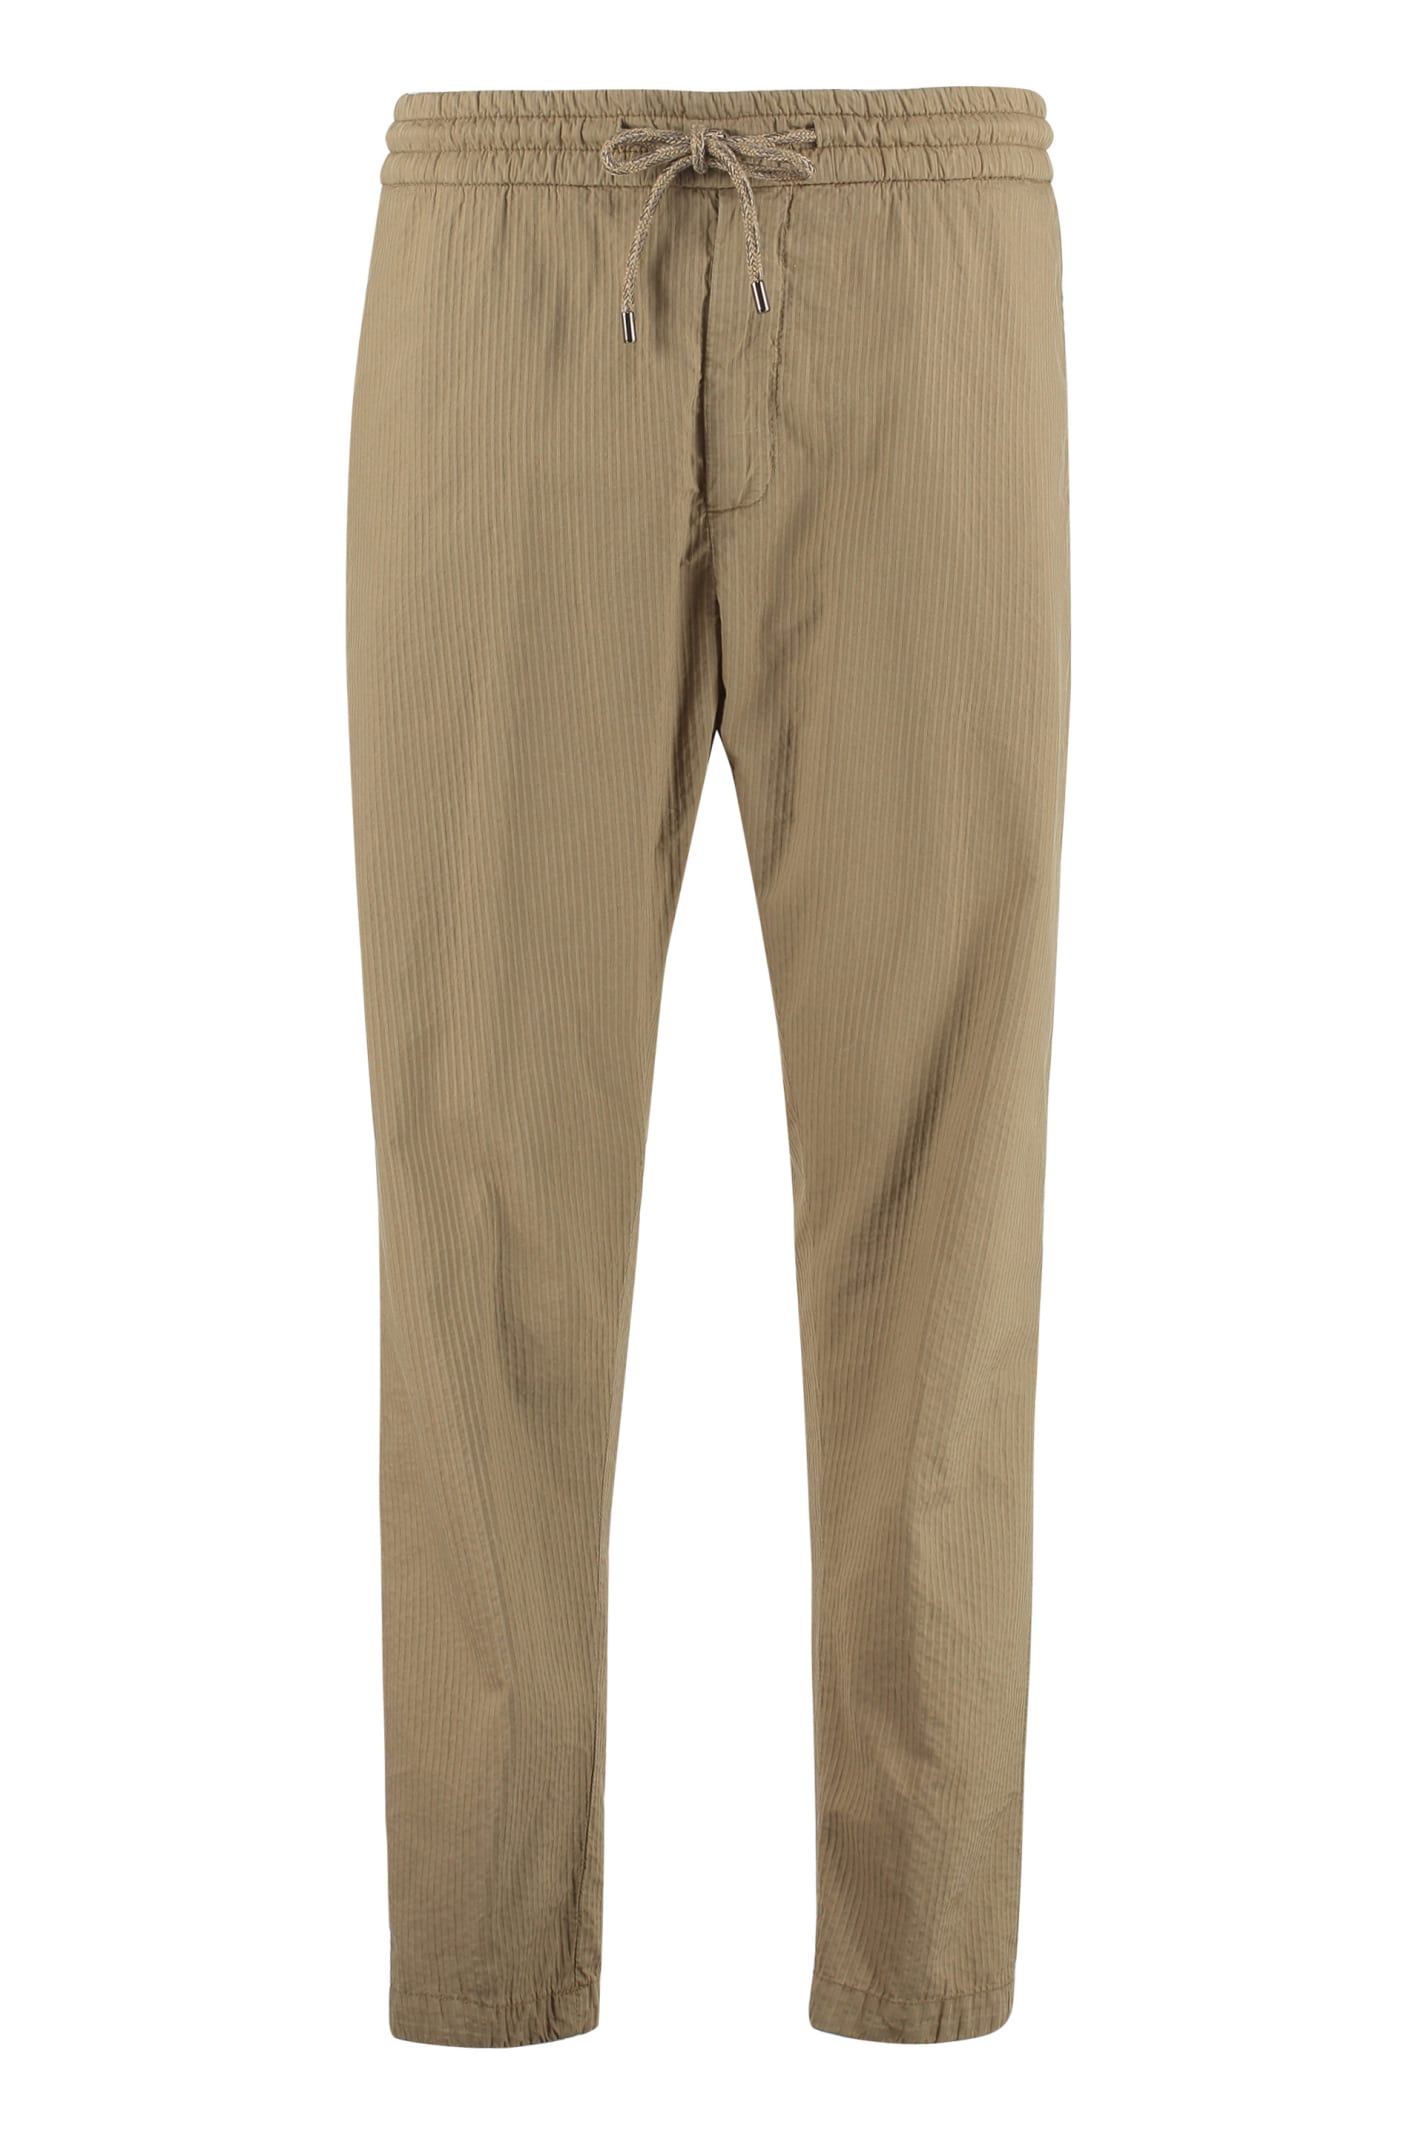 Dondup Dom Cotton Trousers